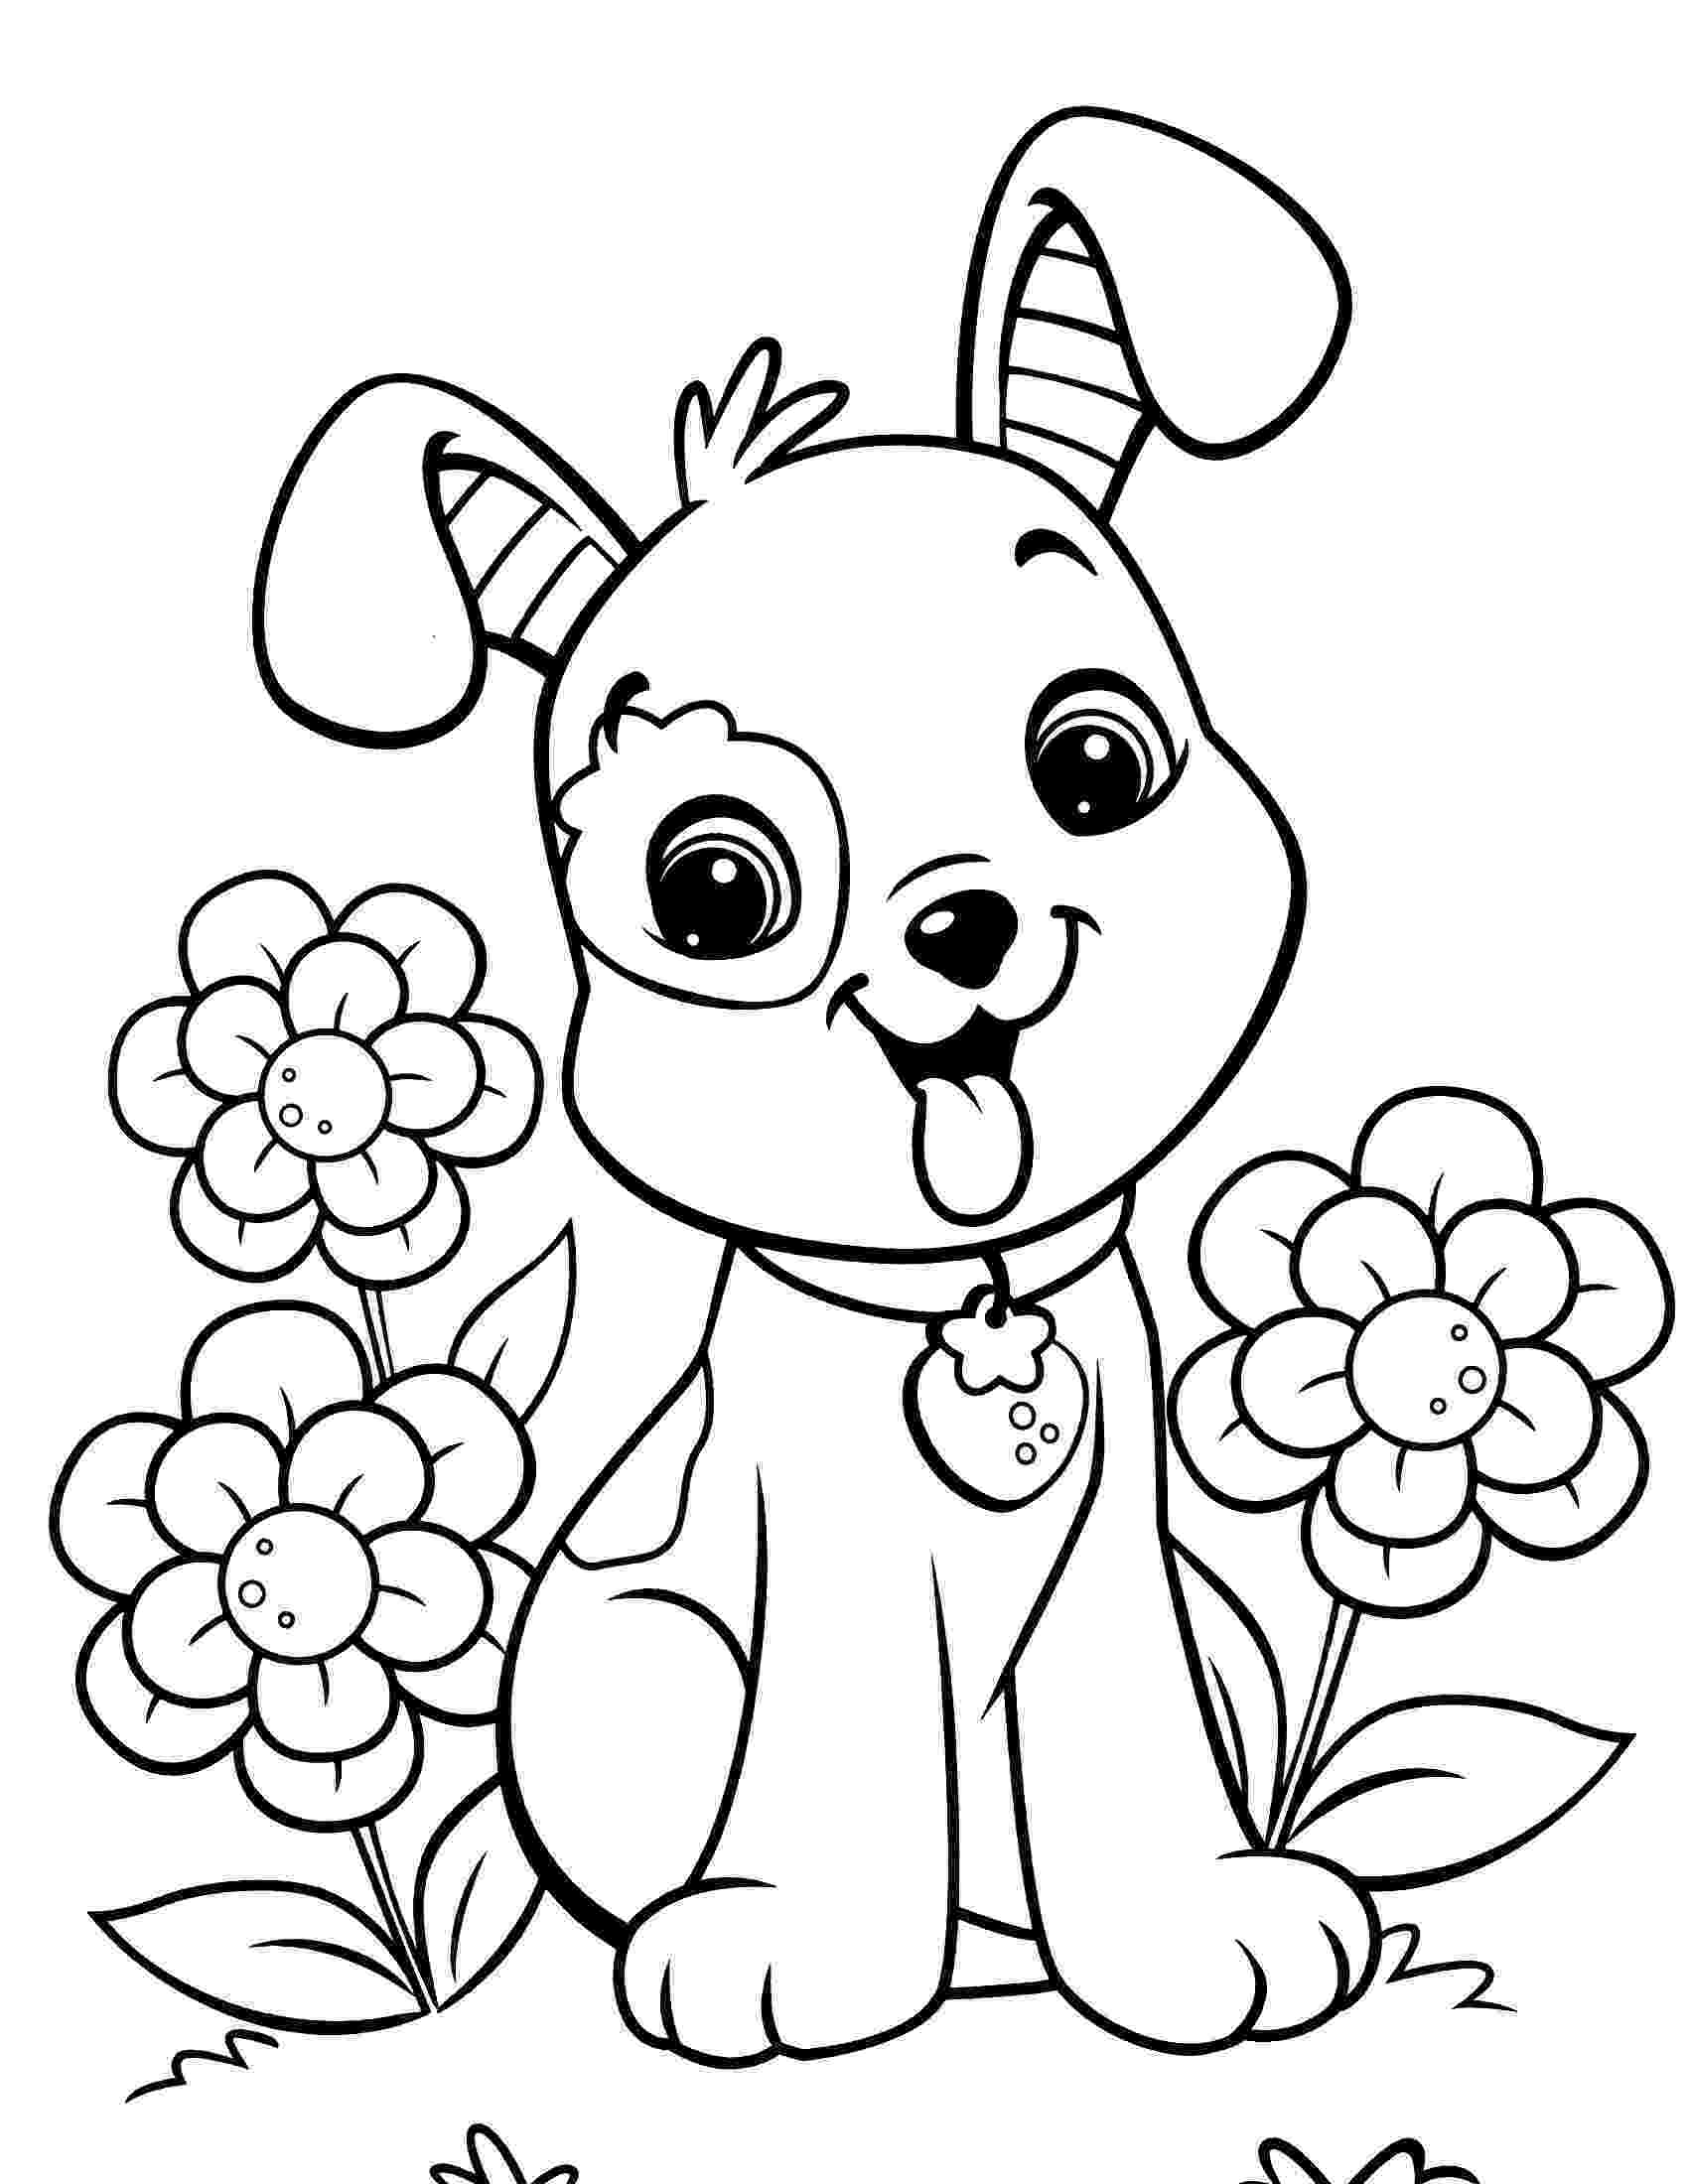 free online dog coloring pages dogs to download for free dogs kids coloring pages online coloring dog pages free 